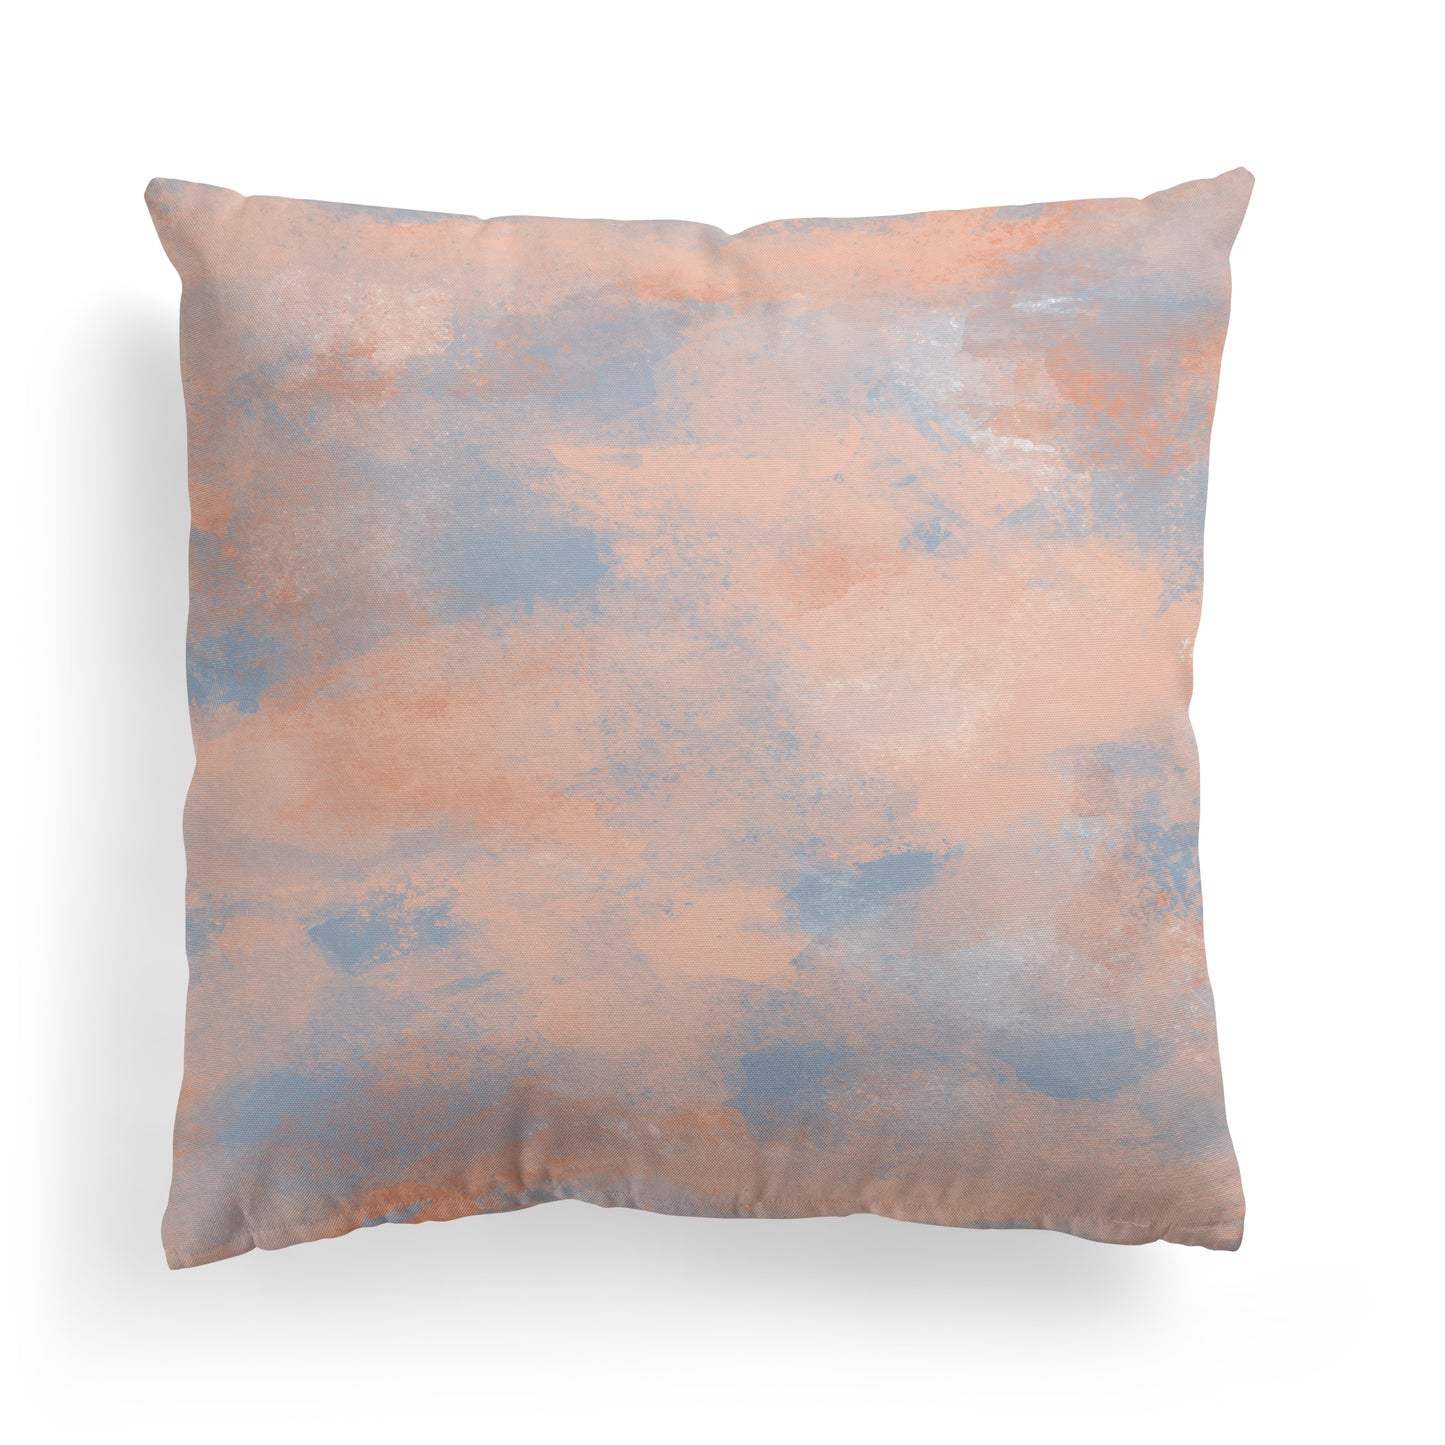 Throw Pillow with Bright Pastel Paintbrush